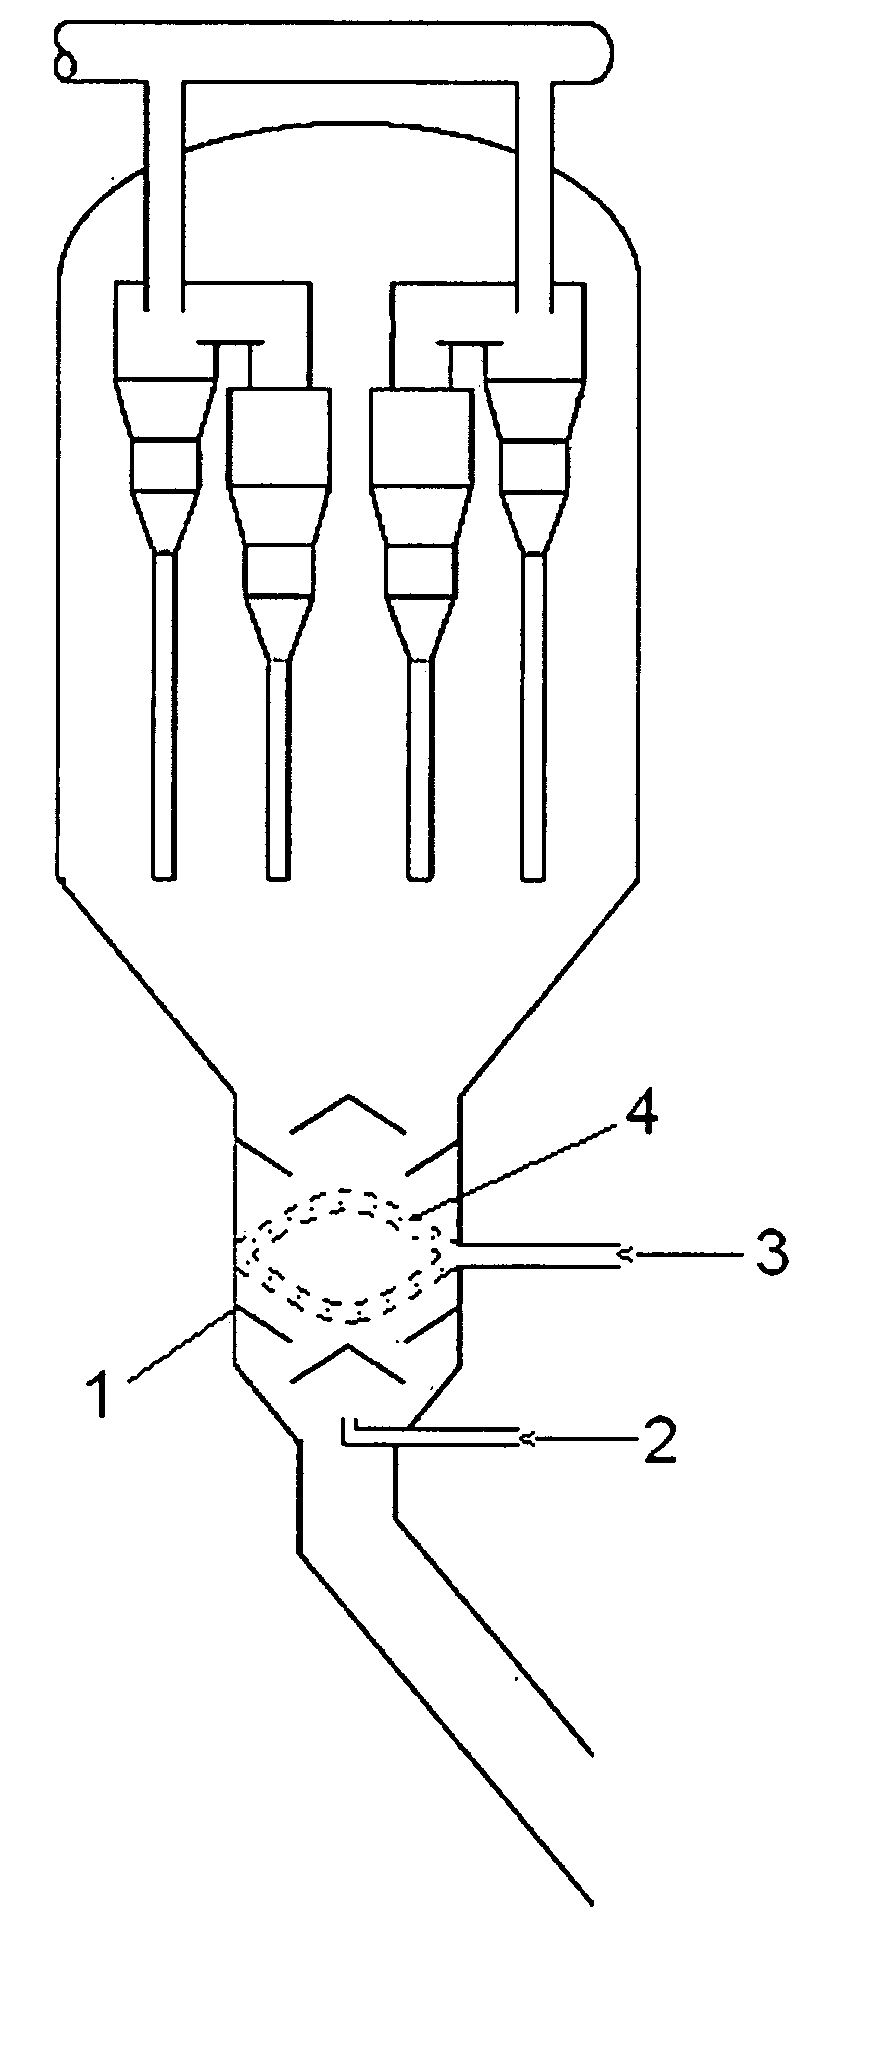 Process and device to optimize the yield of fluid catalytic cracking products